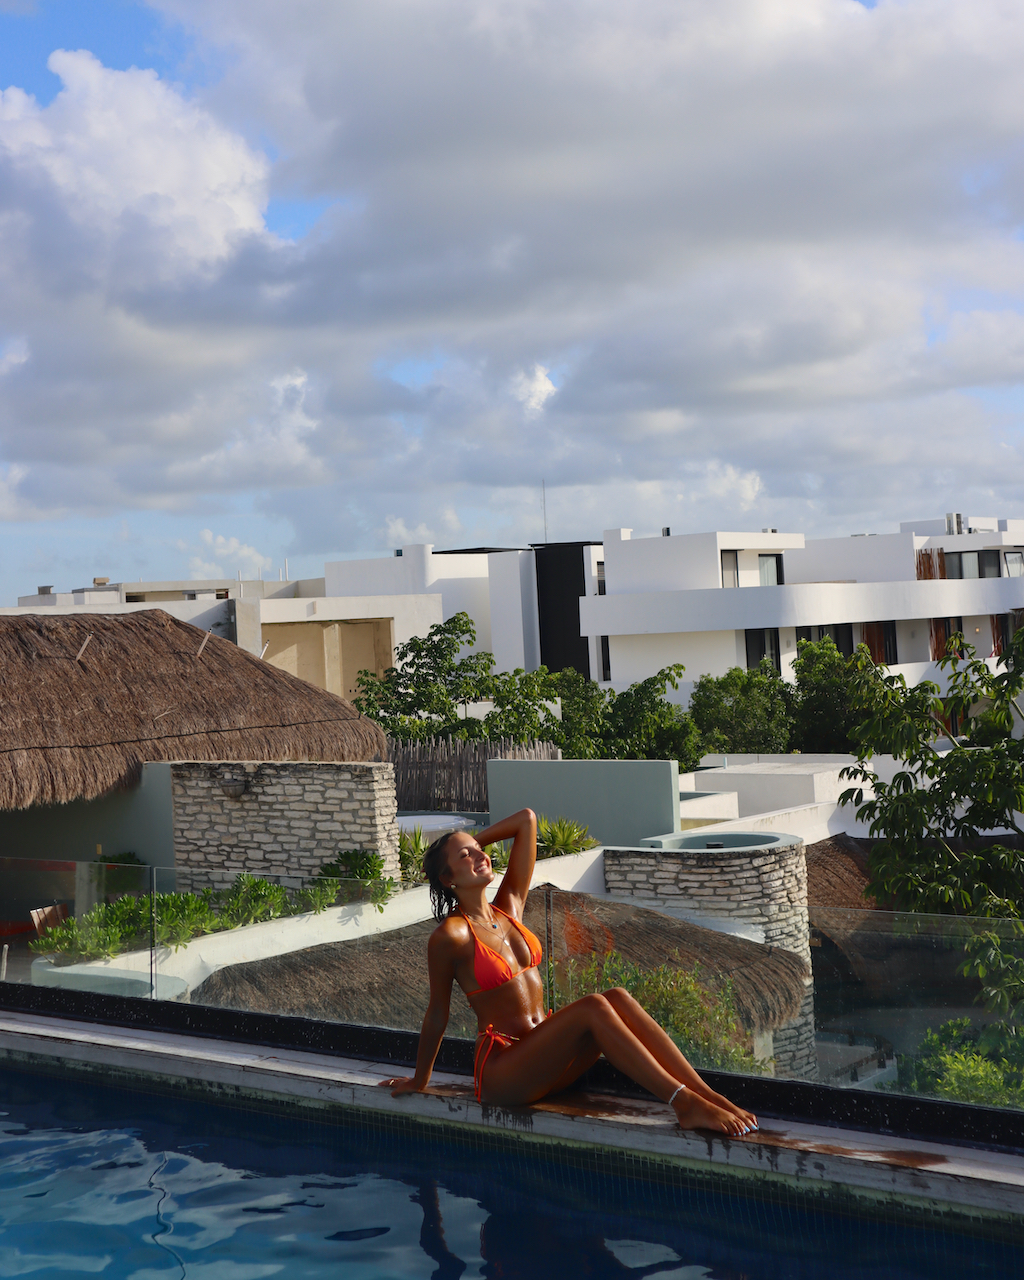 The Ultimate 10 Day Travel Guide To Tulum, Mexico